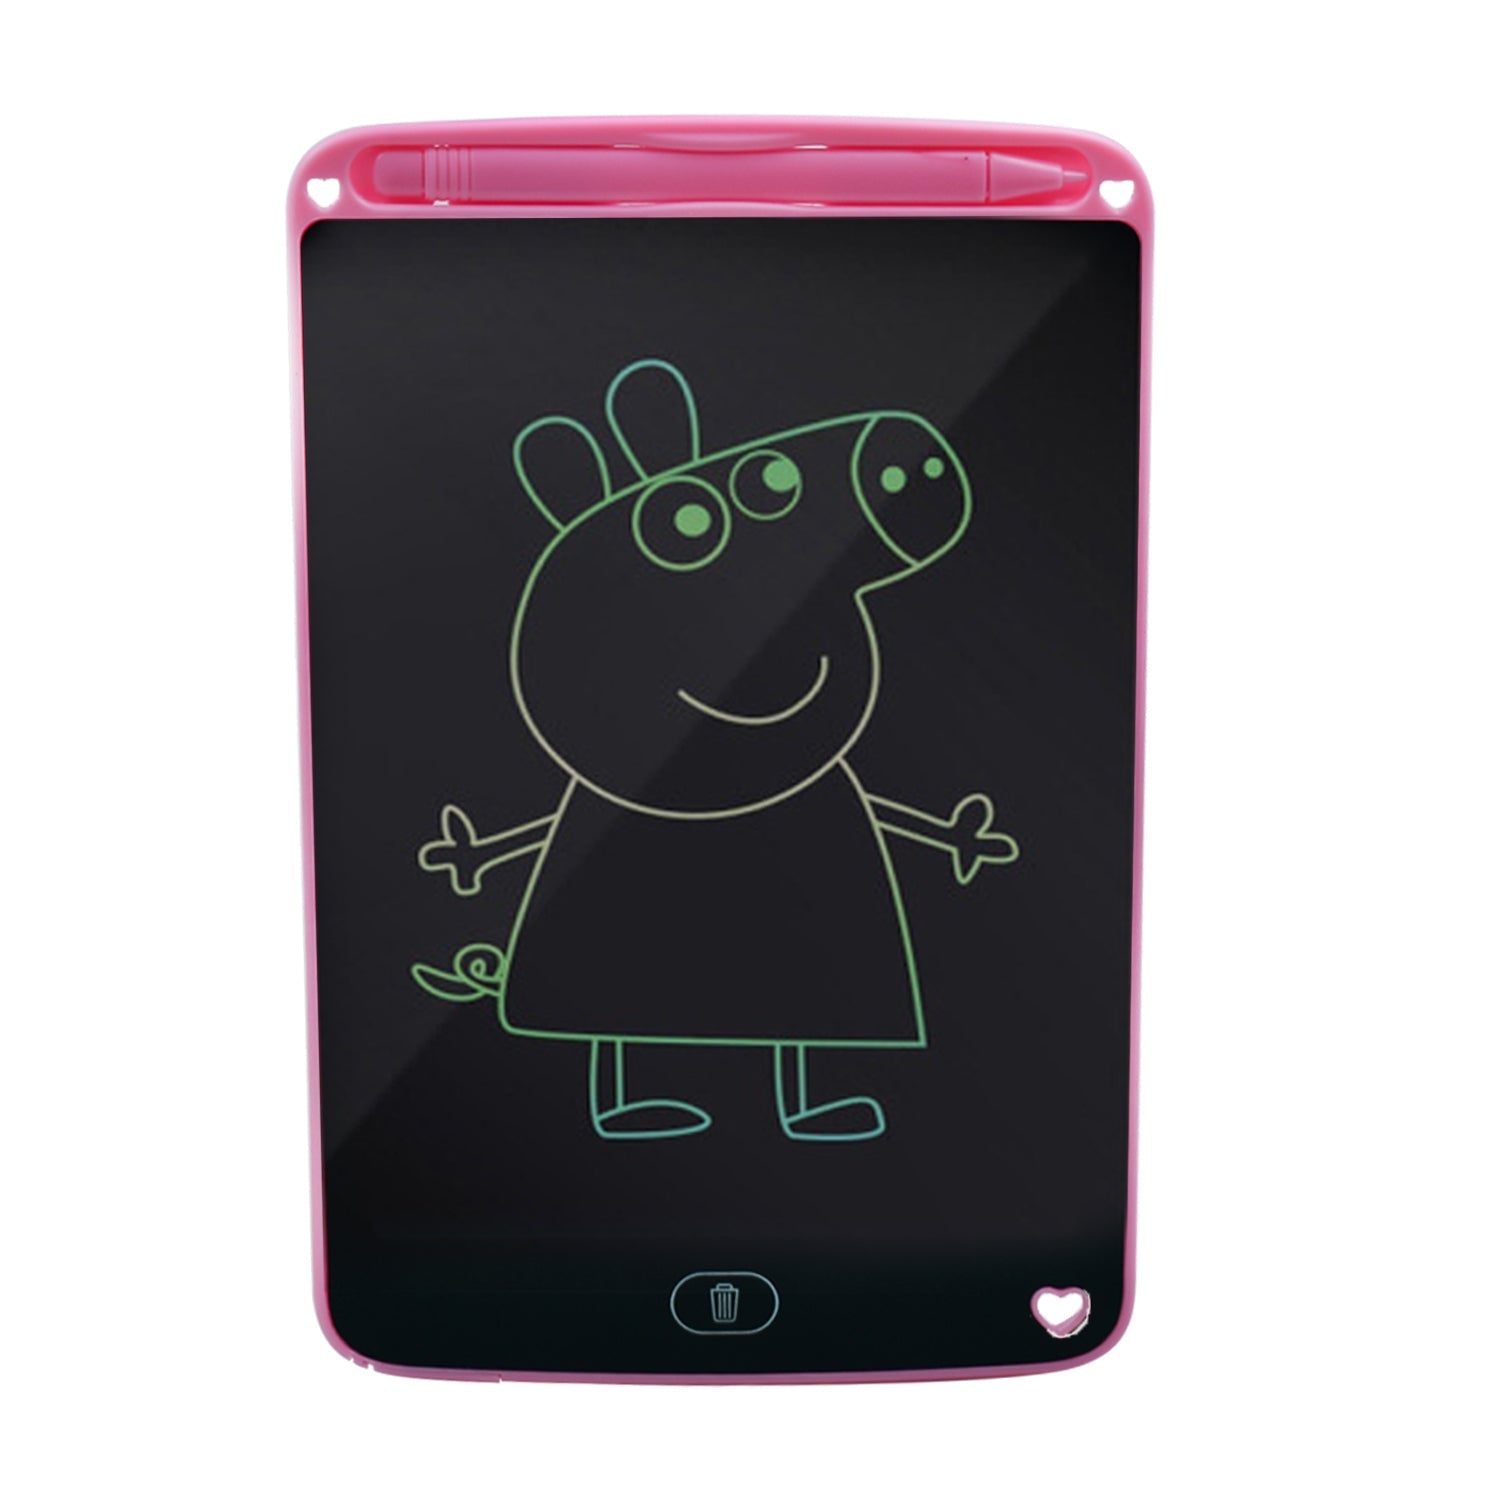 Portable 8.5 LCD Writing Digital Tablet Pad for Writing/Drawing